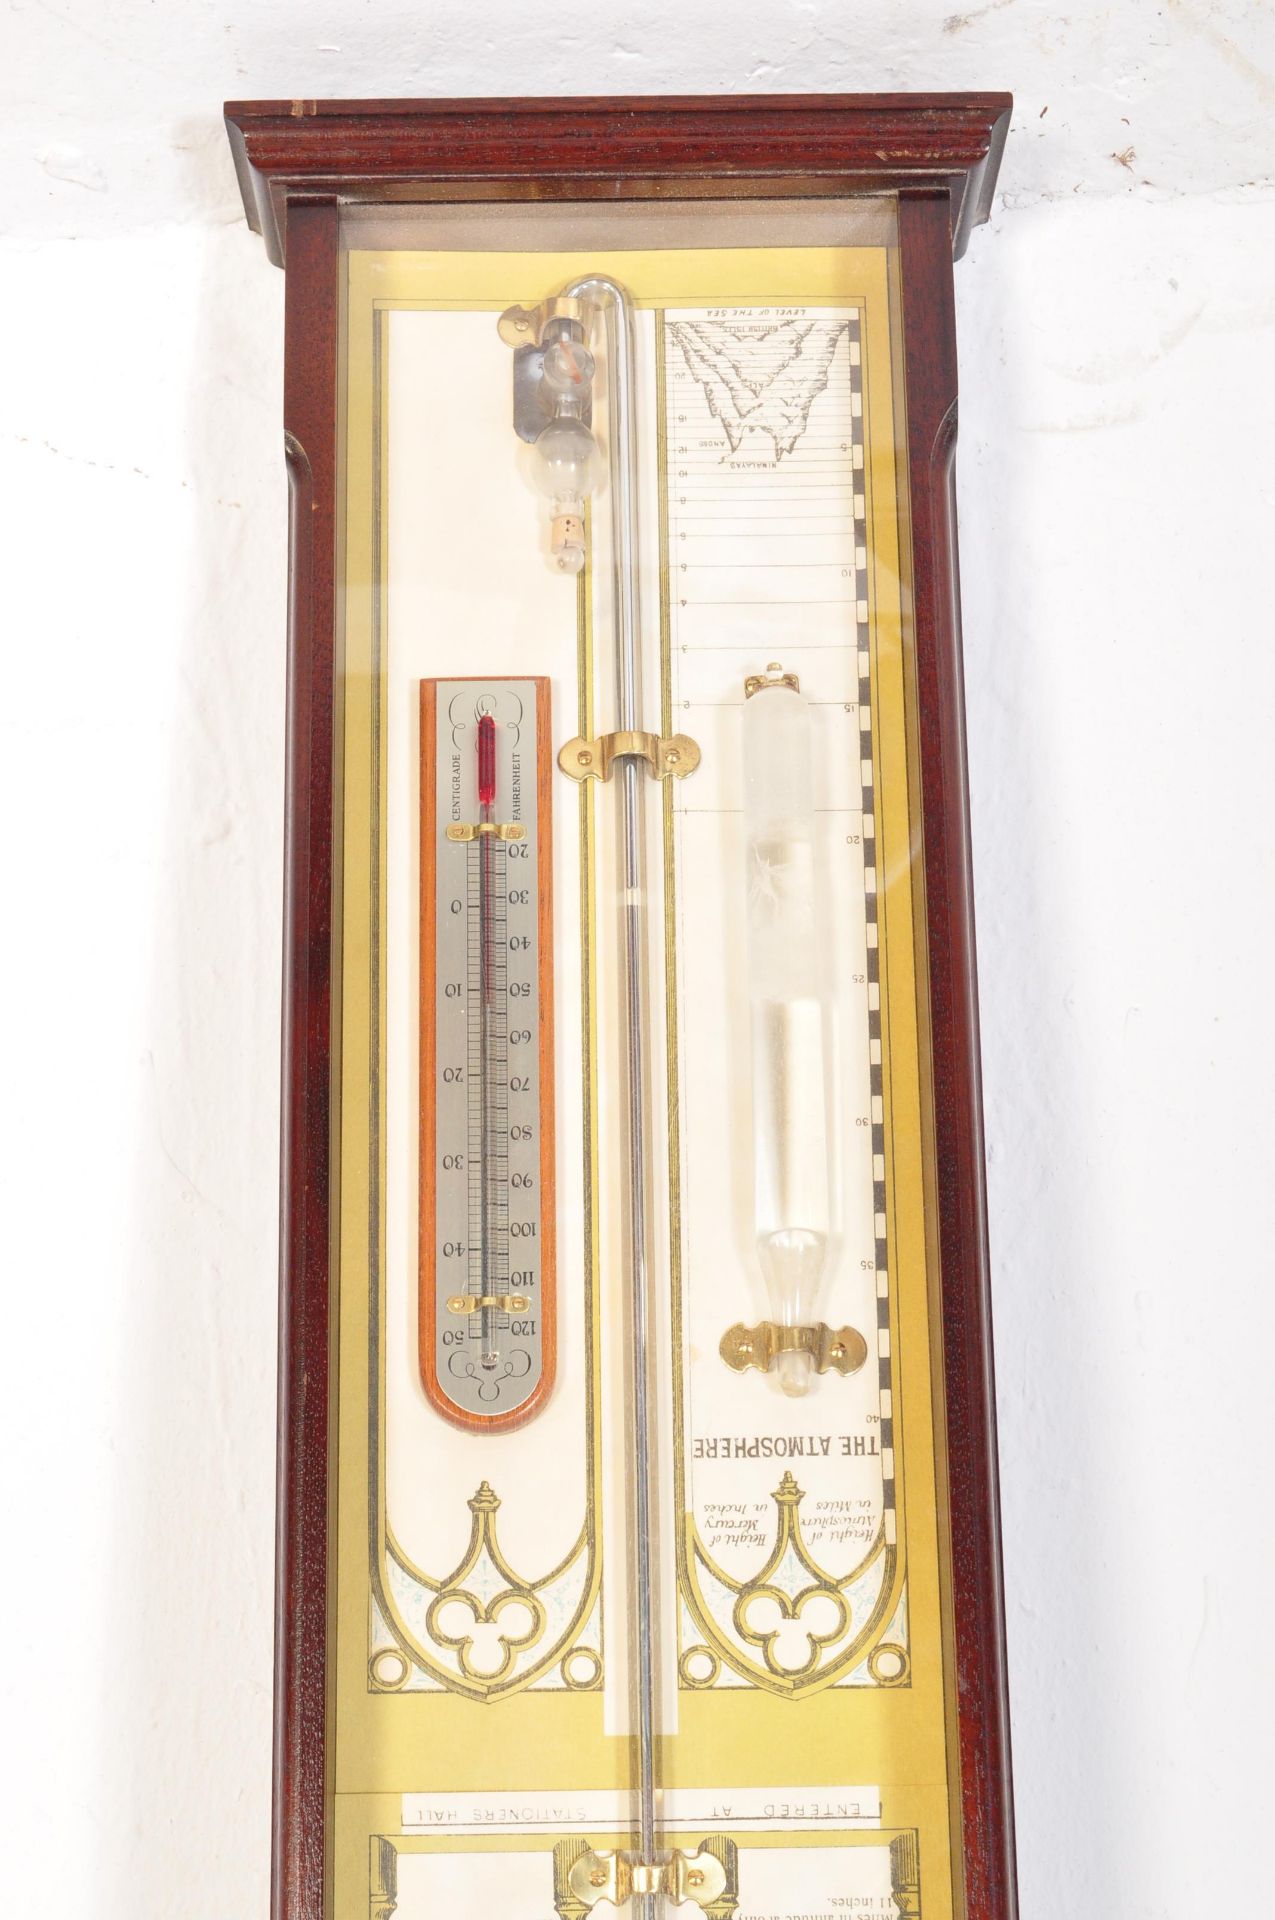 MAHOGANY CASED ADMIRAL FITZROY WALL BAROMETER - Image 3 of 6